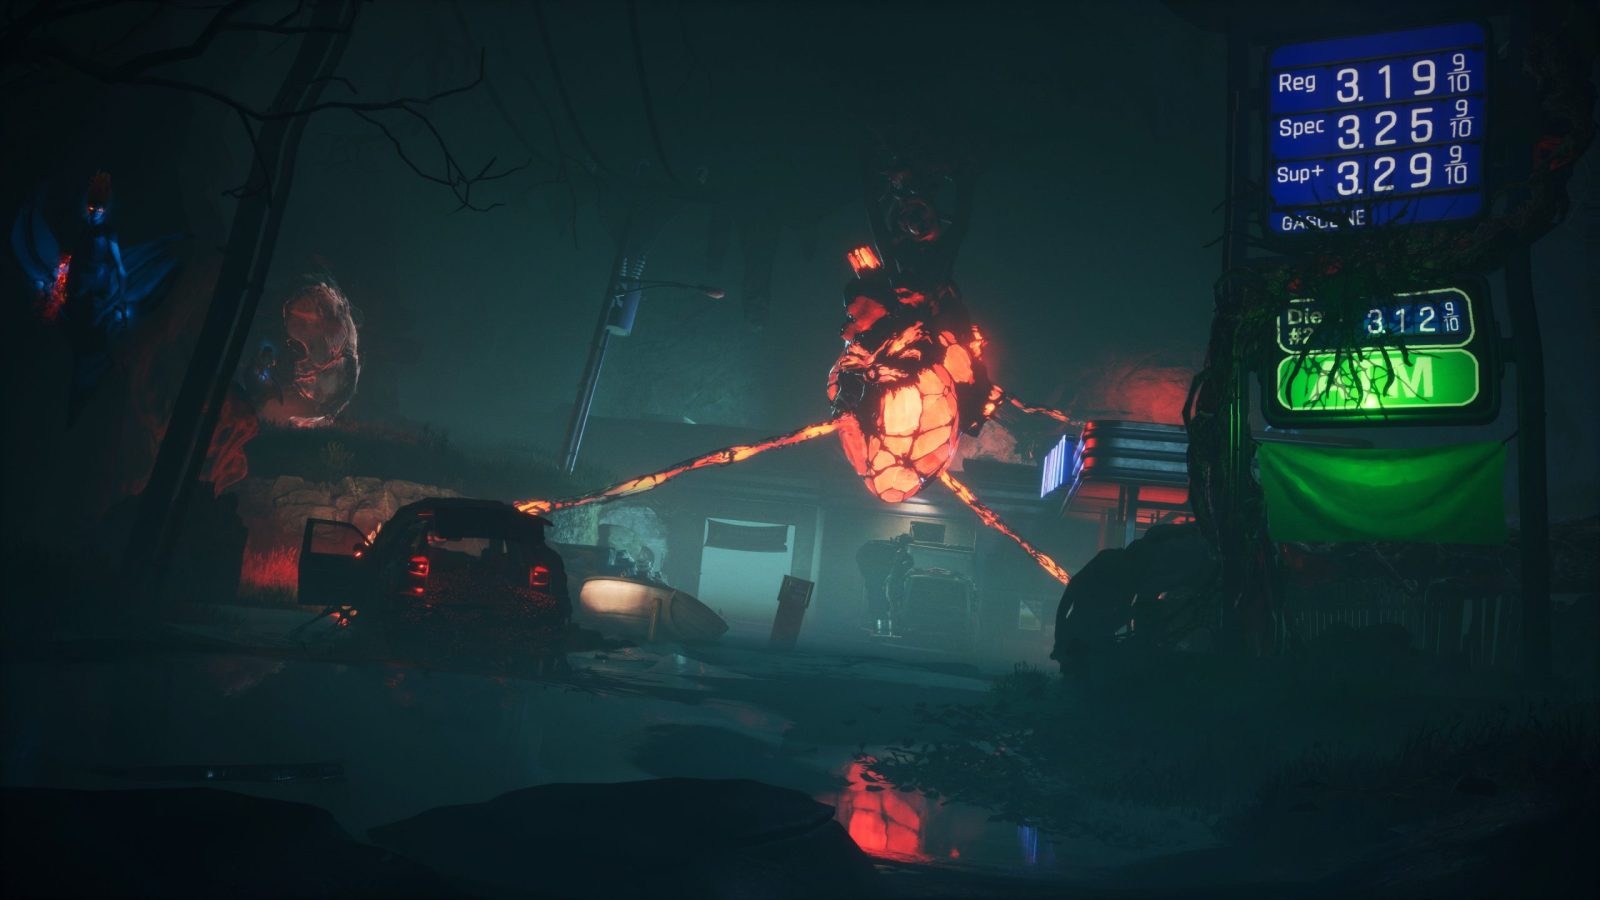 Redfall Reviews Call It A Weak Game That Doesn't Reflect Arkane's Pedigree